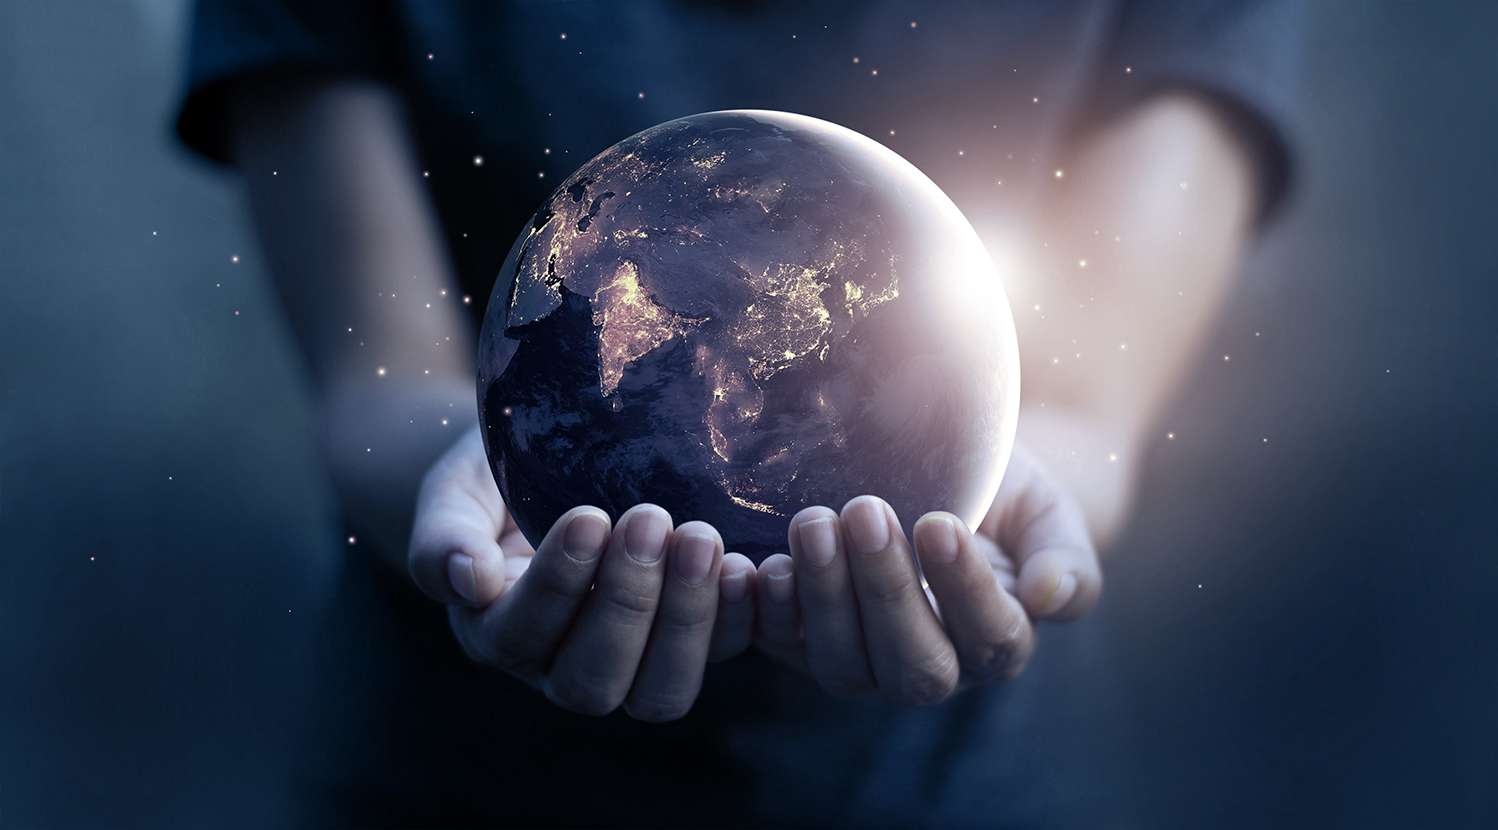 An image of Earth being held in a person's hands.